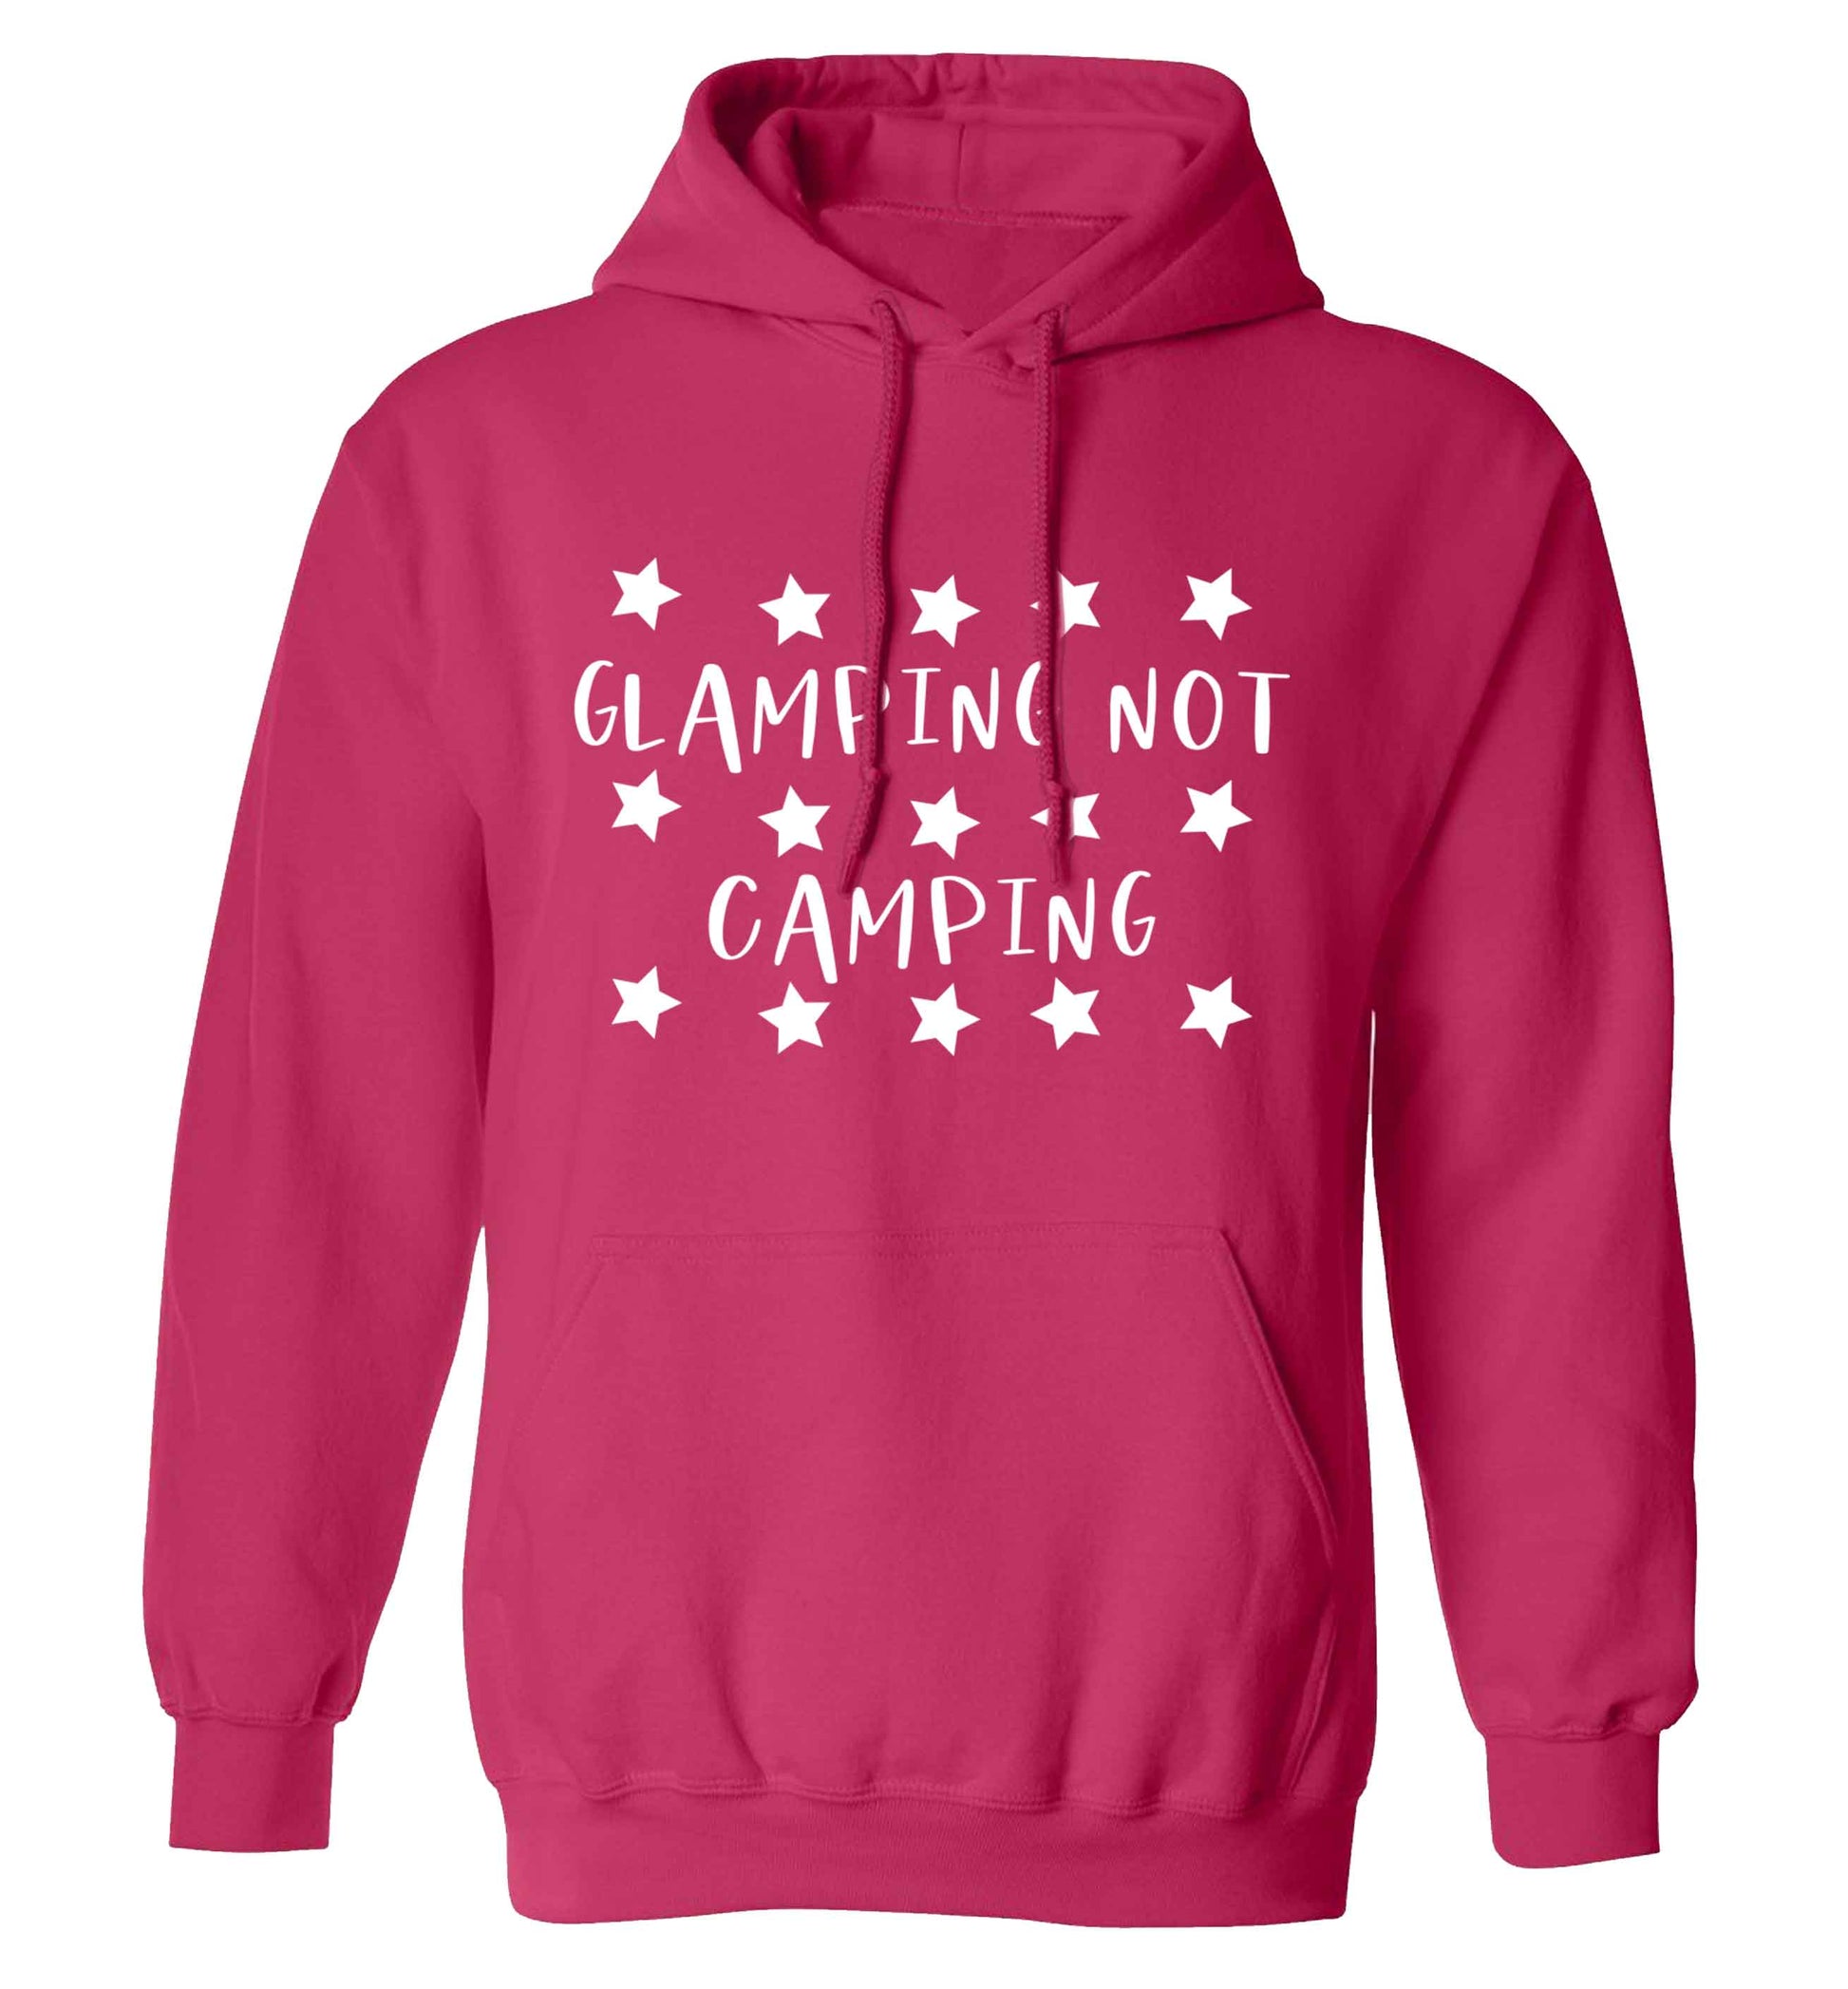 Glamping not camping adults unisex pink hoodie 2XL